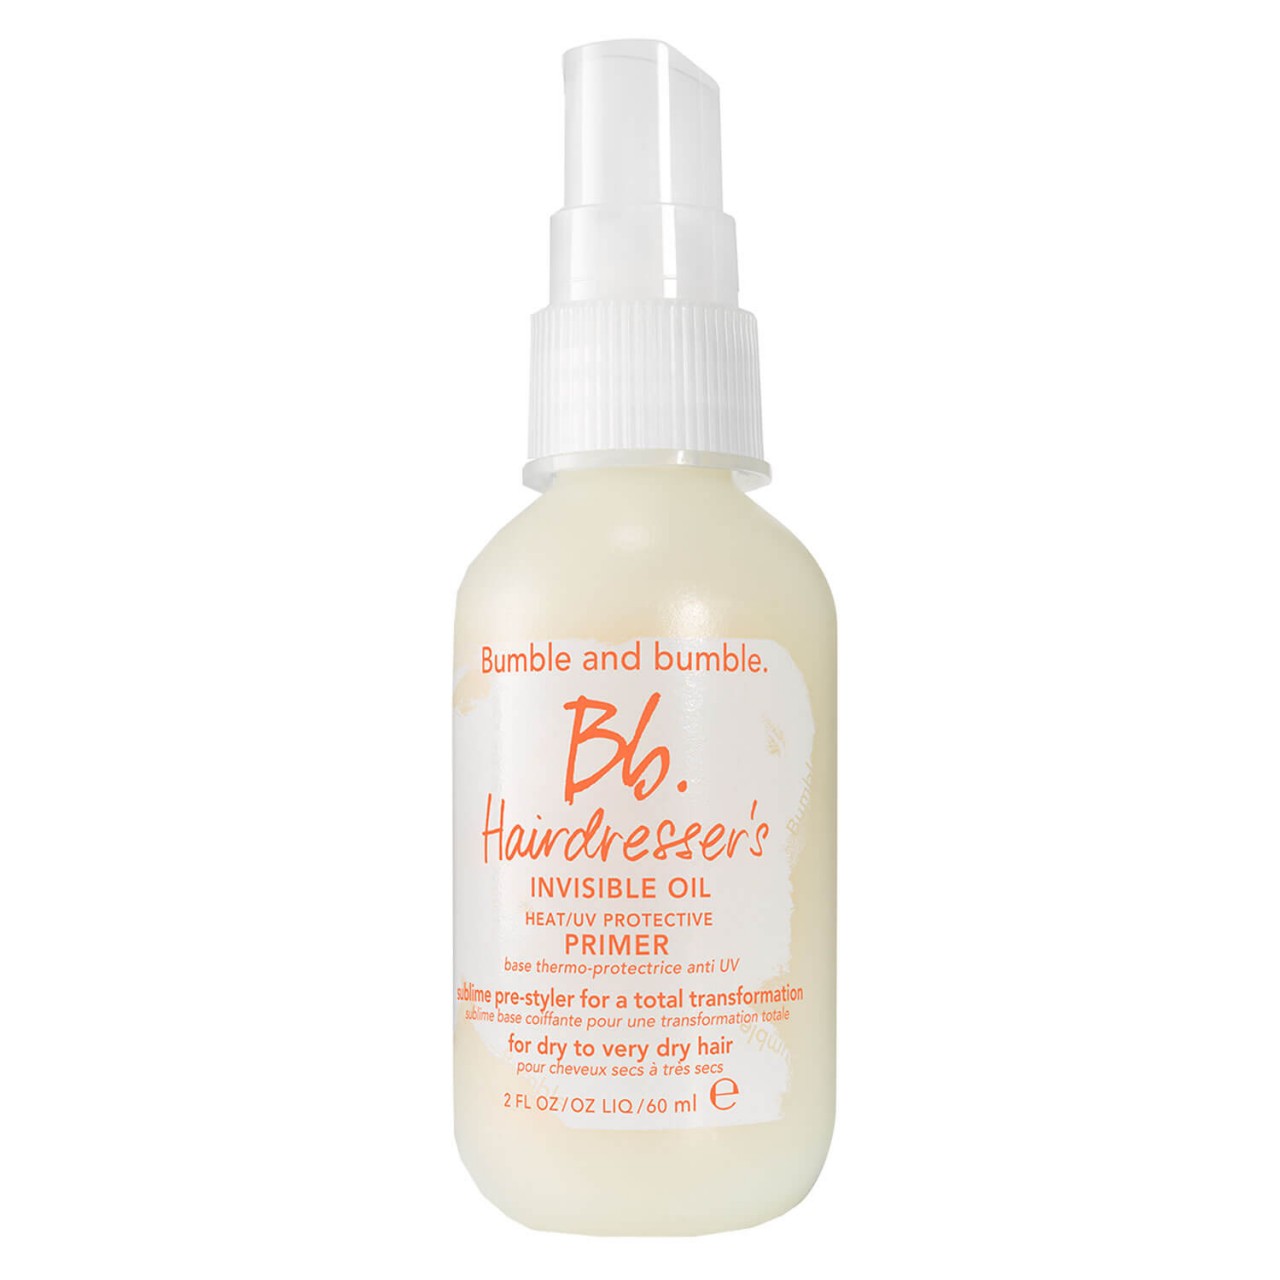 Bb. Hairdresser's Invisible Oil - Primer von Bumble and bumble.